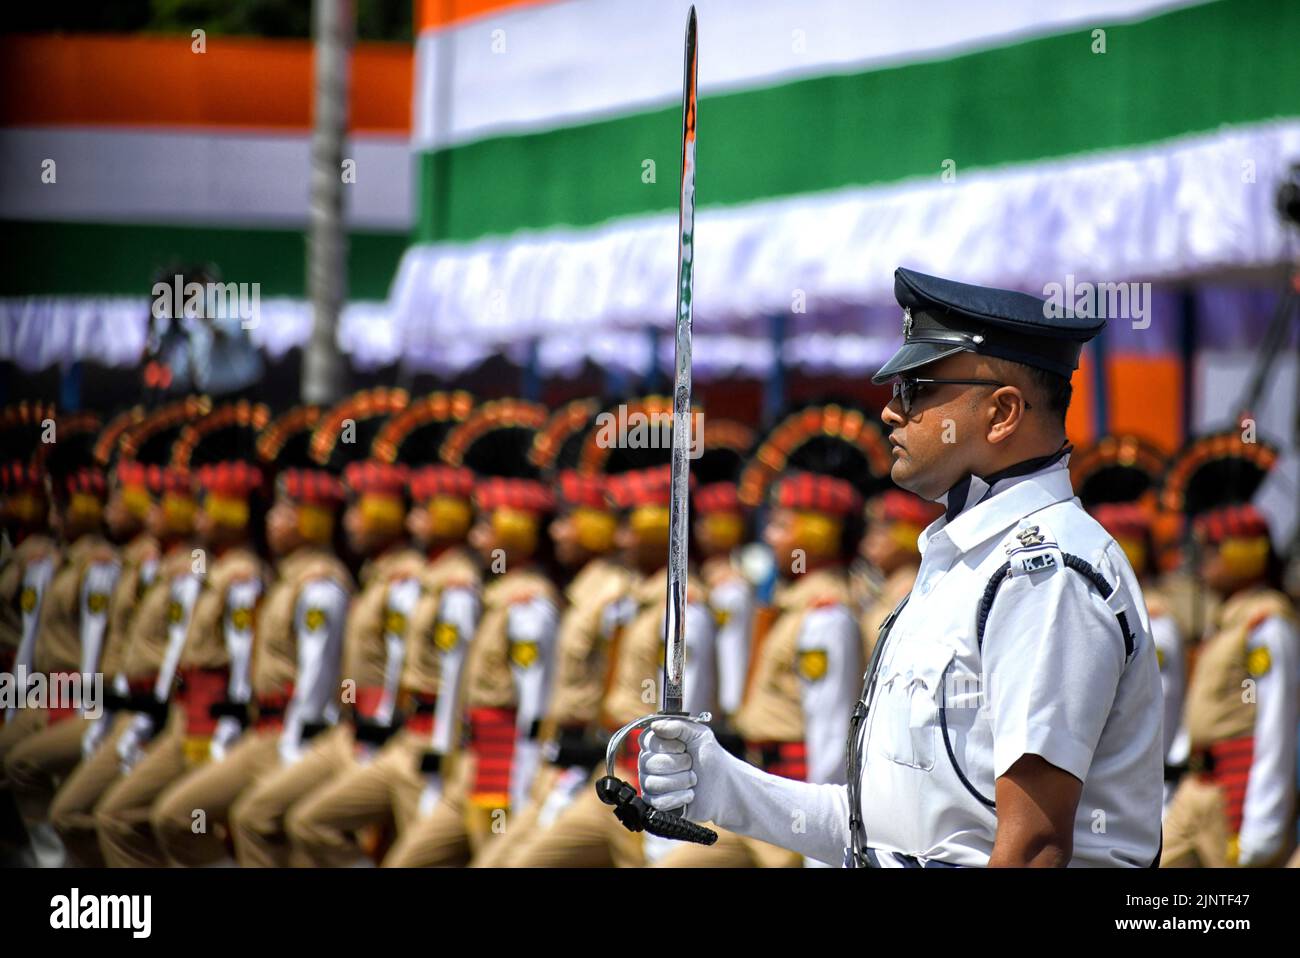 Rapid Action Force (RAF) Police men's Team along with their Team leader seen practicing during the Independence day Final Dress Rehearsal. India prepares to celebrate the 75th Independence day on 15th August 2022 as part of the Azadi Ka Amrit Mahotsav celebration. Stock Photo